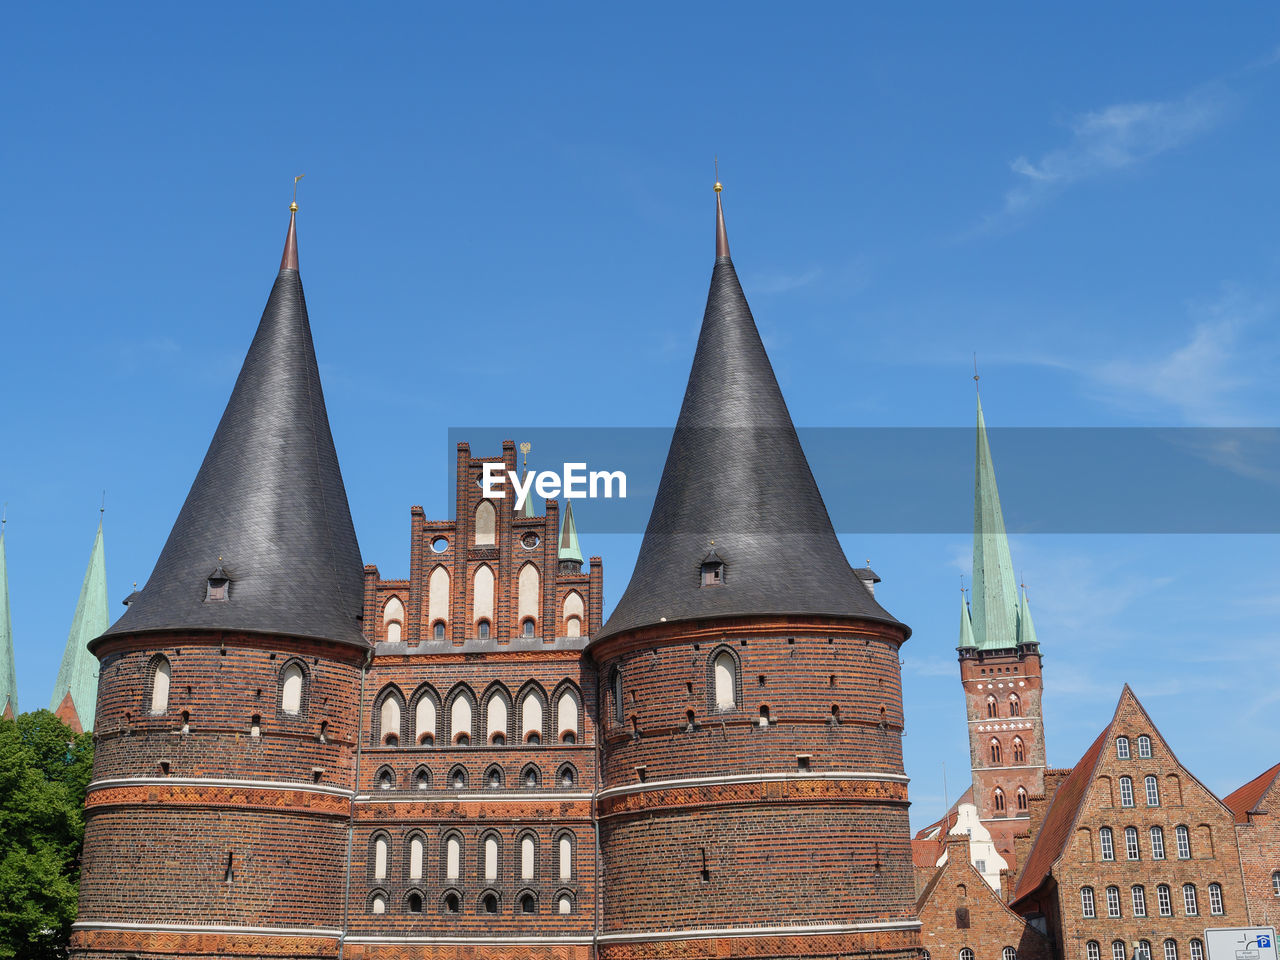 Lübeck and the holstentor